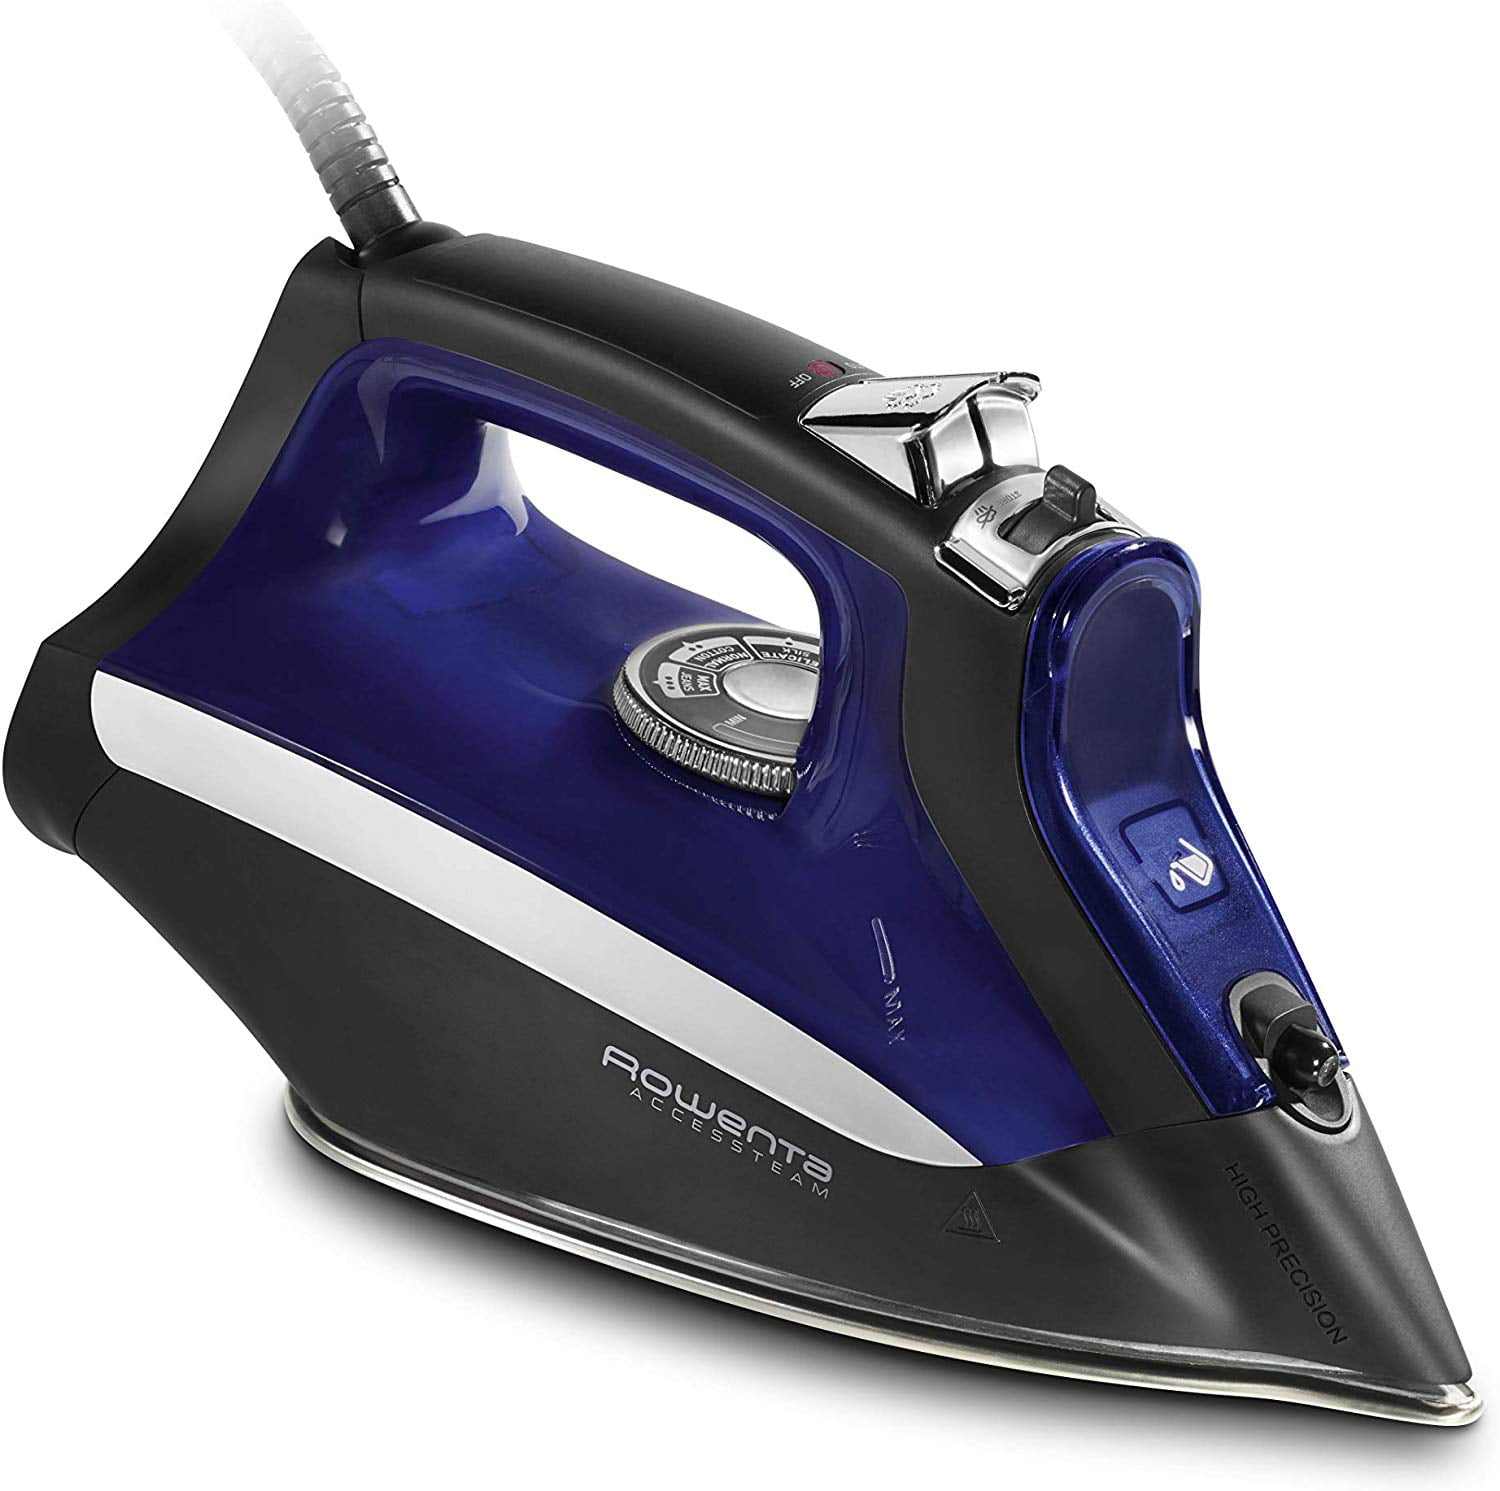 Rowenta DW2160 Acces Steam Iron with Anti Drip System and Auto Shutoff ...